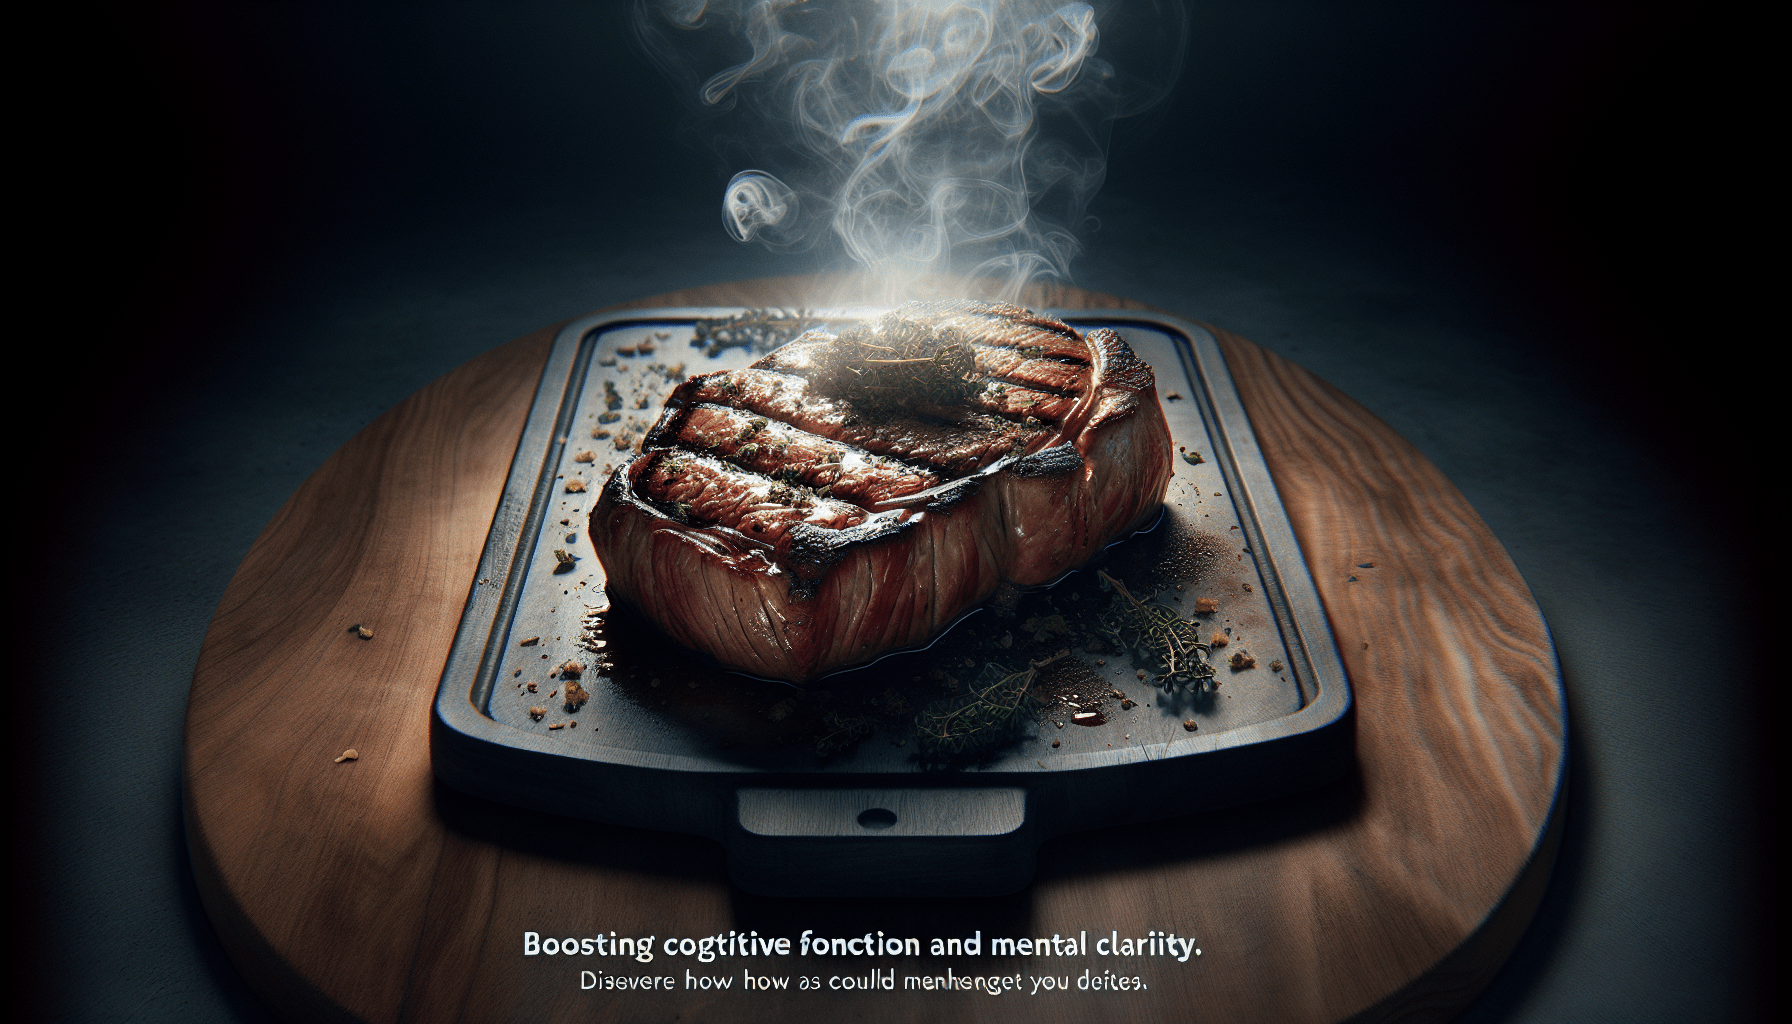 The Carnivore Diet: Boosting Cognitive Function and Mental Clarity